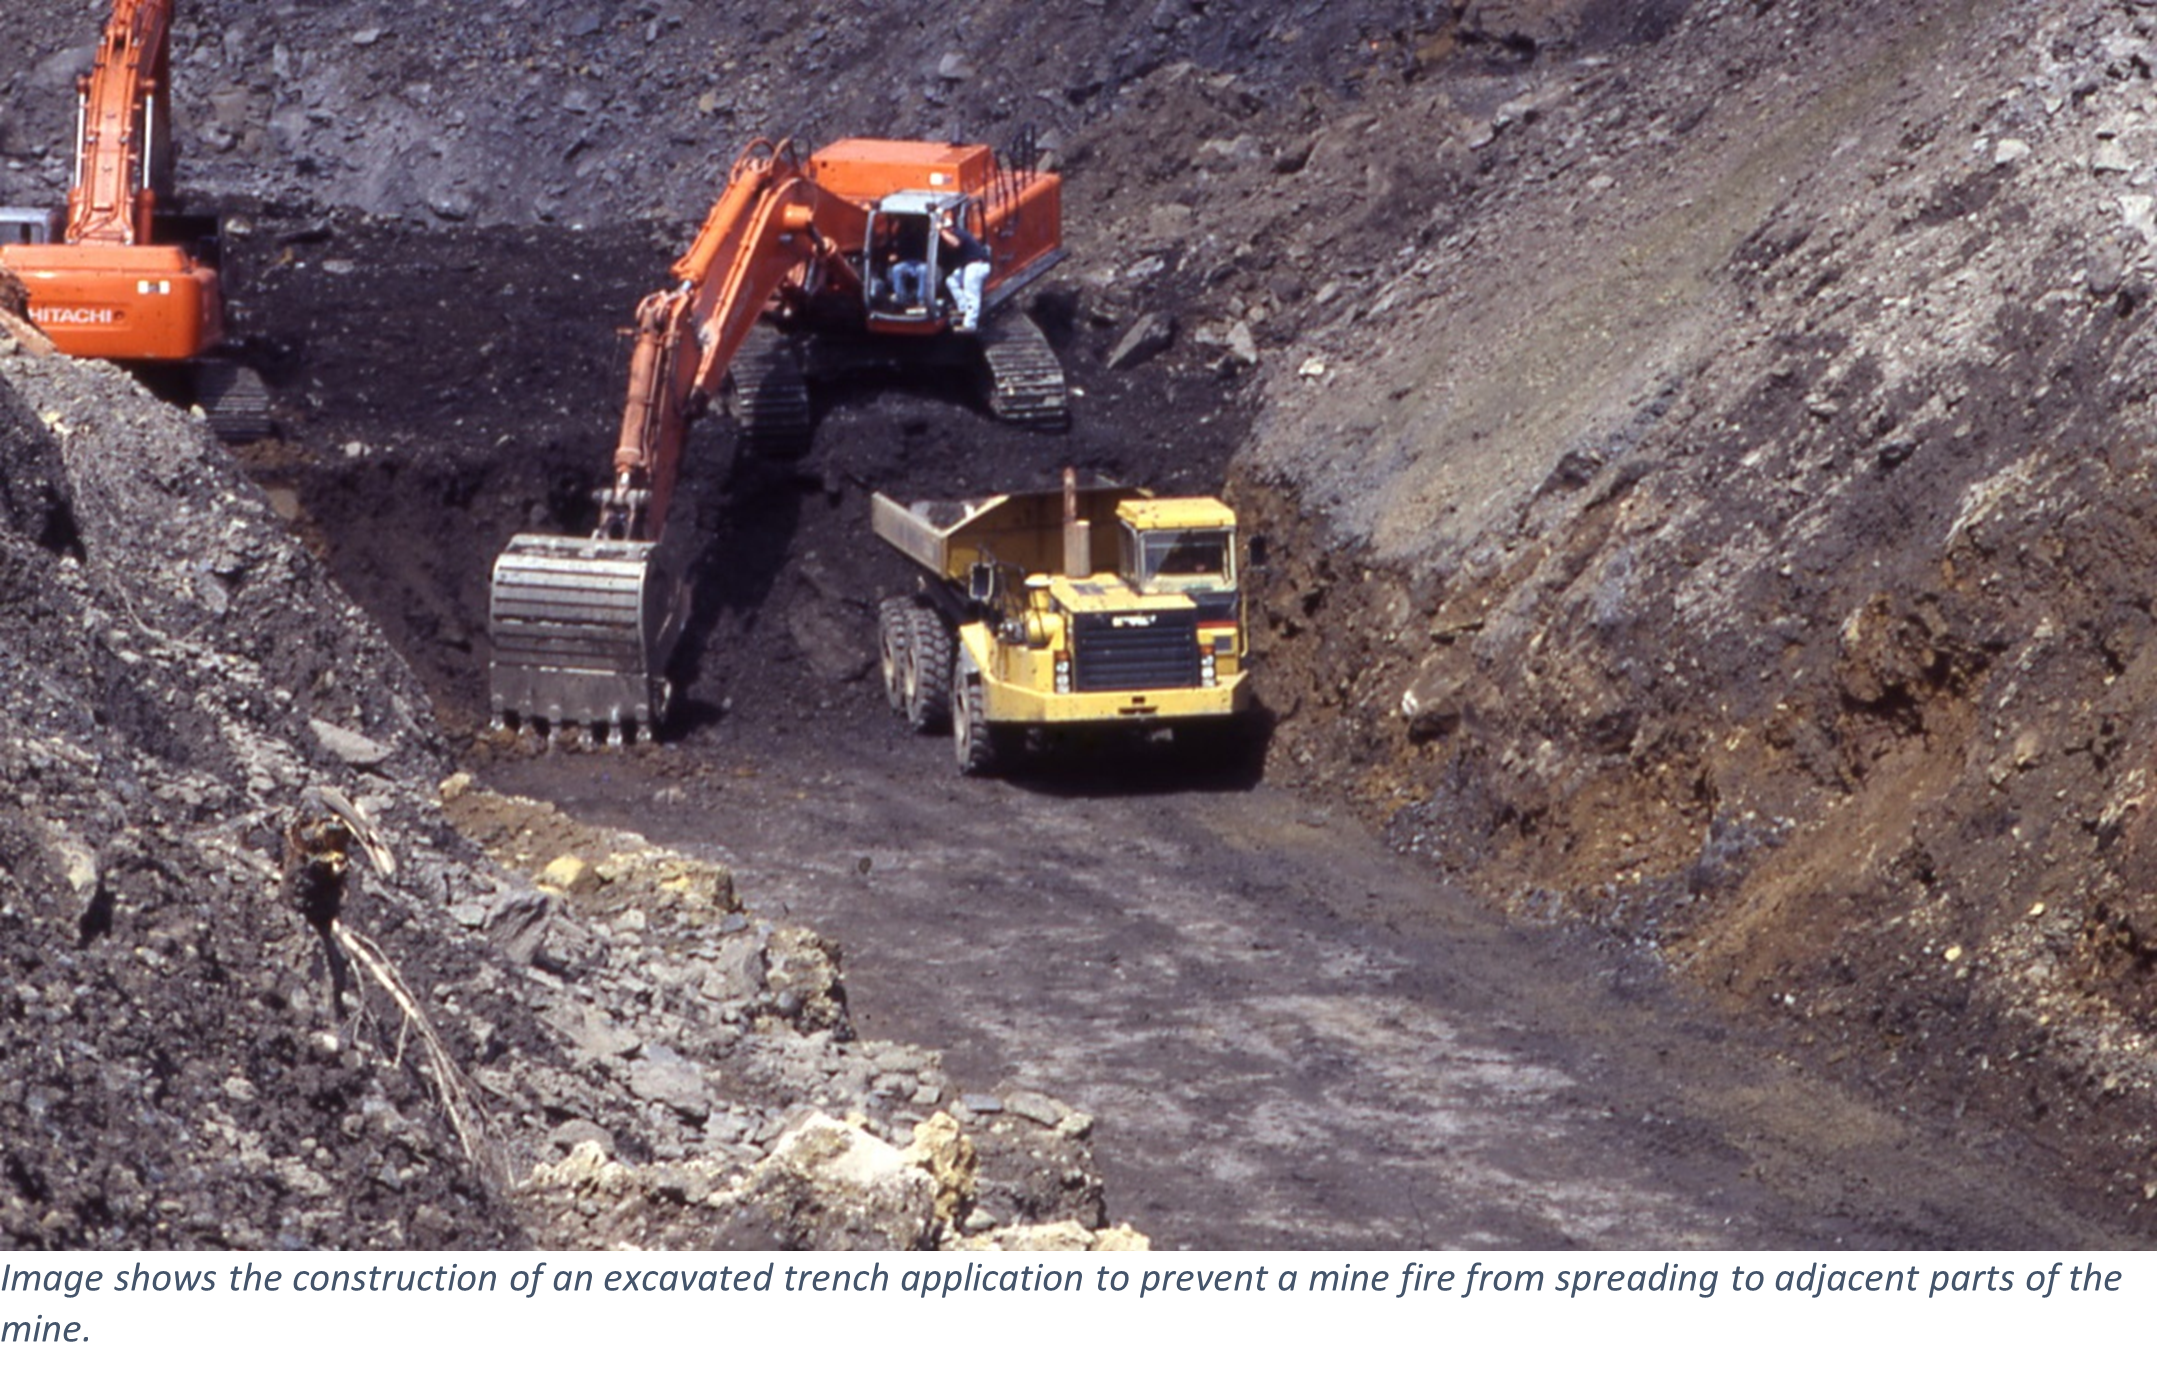 Image shows the construction of an excavated trench application to prevent a mine fire from spreading to adjacent parts of the mine.